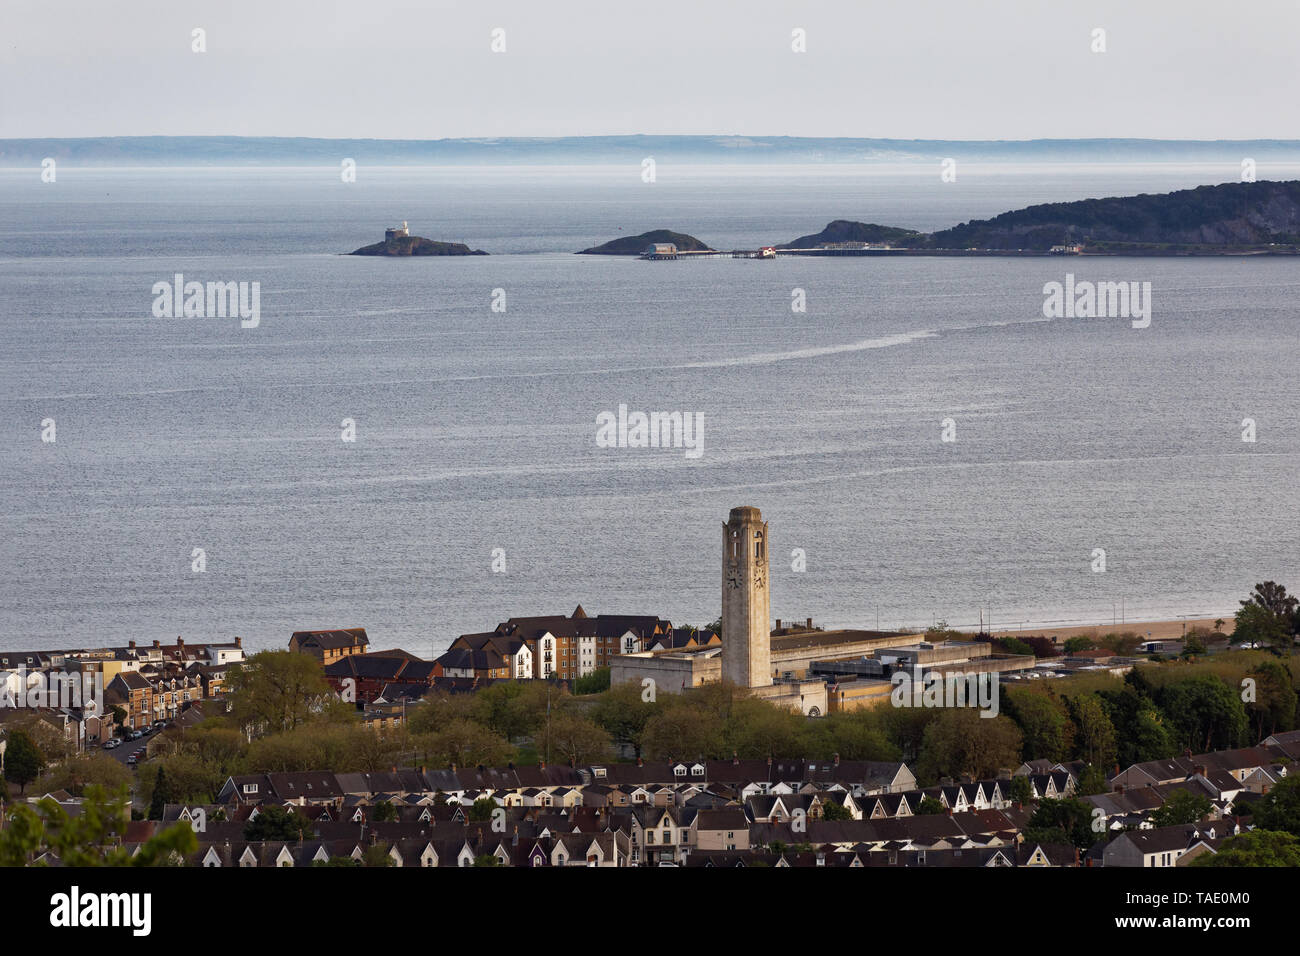 Pictured: The Guildhall in Swansea with Mumbles in the background. Wednesday 22 May 2019 Re: General view of Swansea, Wales, UK Stock Photo